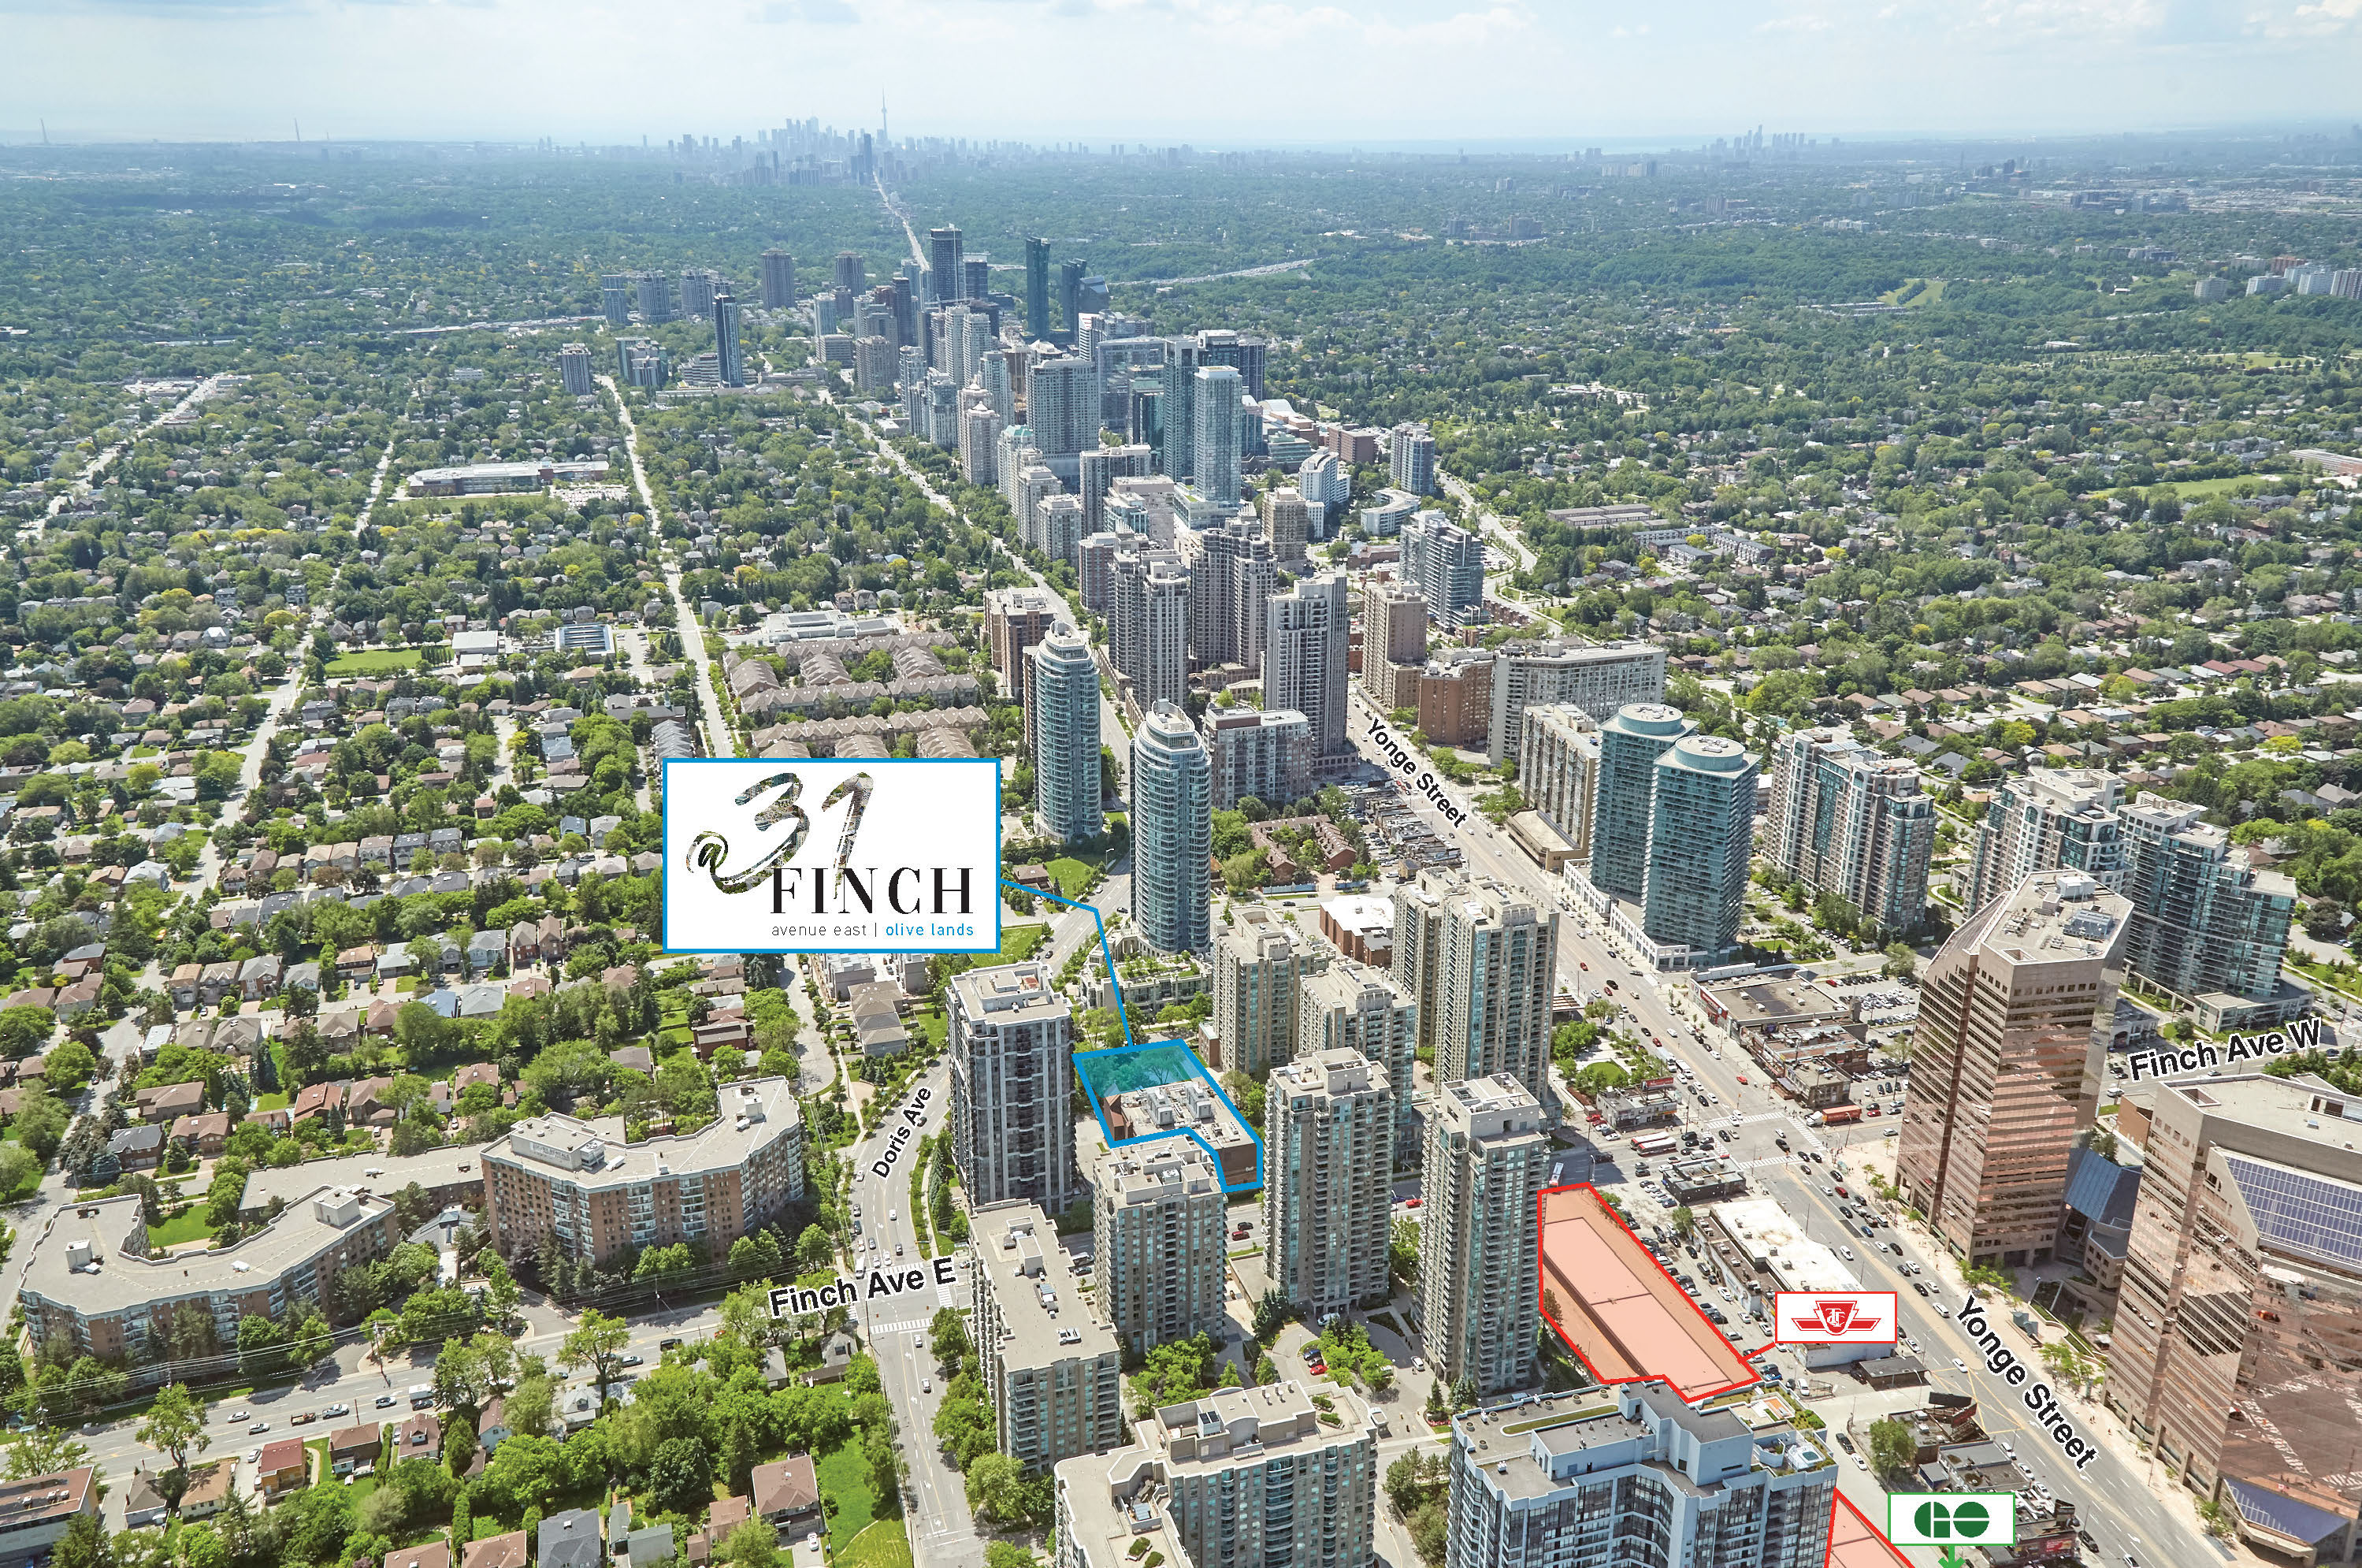 31 Finch Avenue East, Olive Lands, North York City Centre, Colliers, Toronto